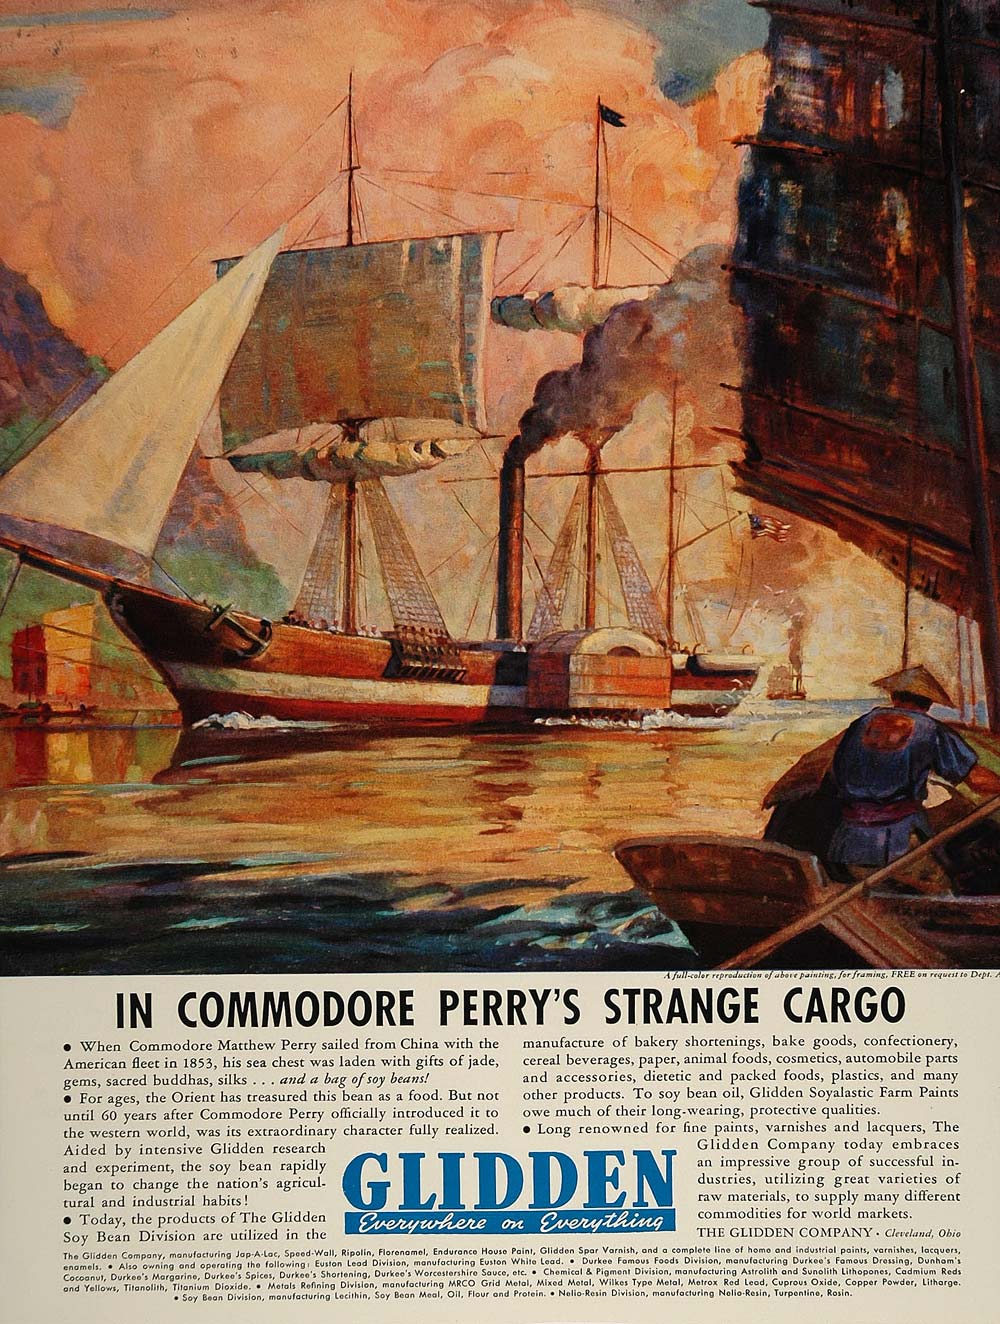 1936 Ad Glidden Soyalastic Paint Commodore Perry Ship - ORIGINAL ADVERTISING FT4